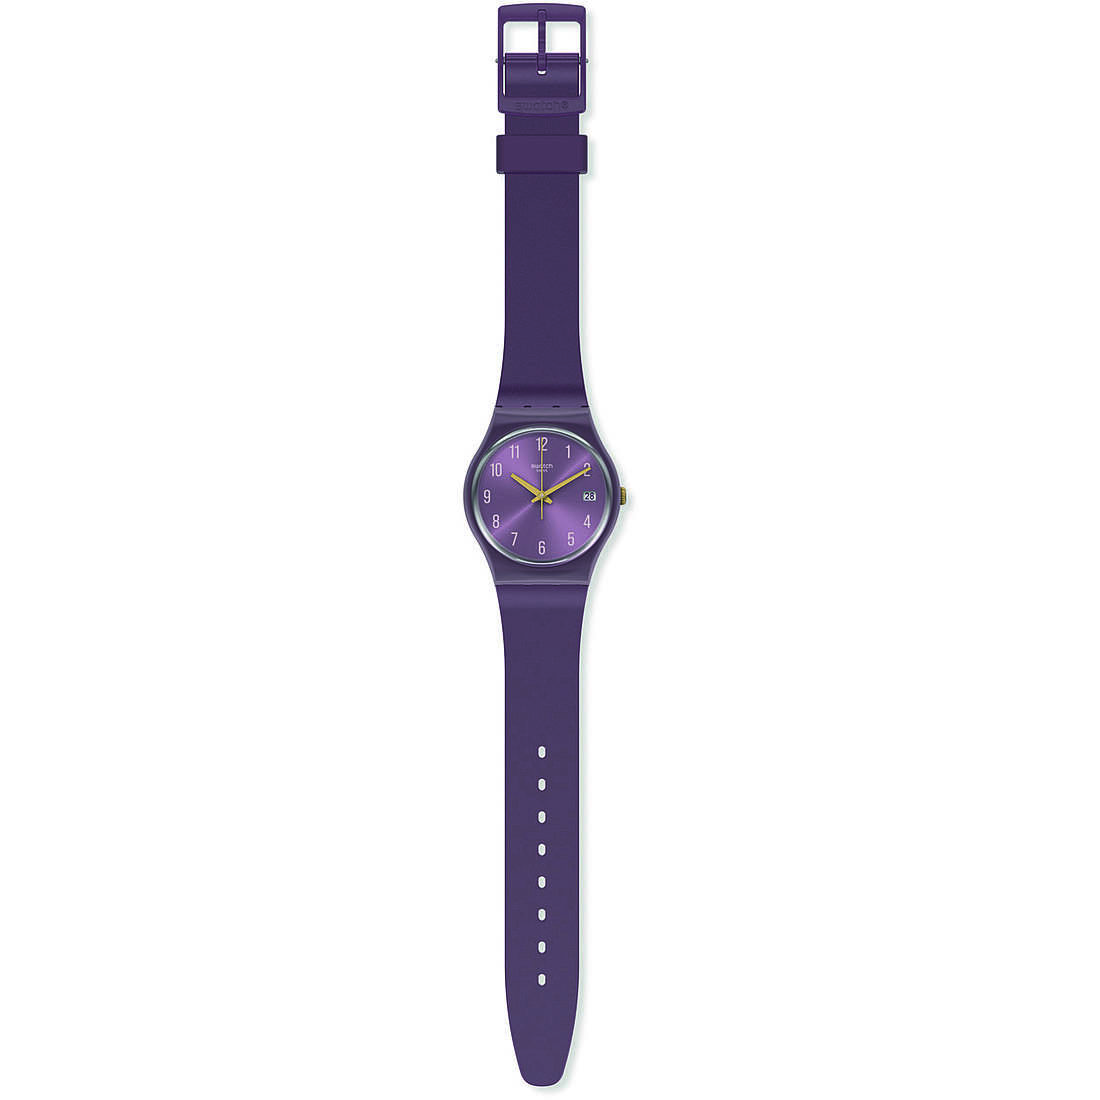 orologio solo tempo donna Swatch Monthly Drops GV403